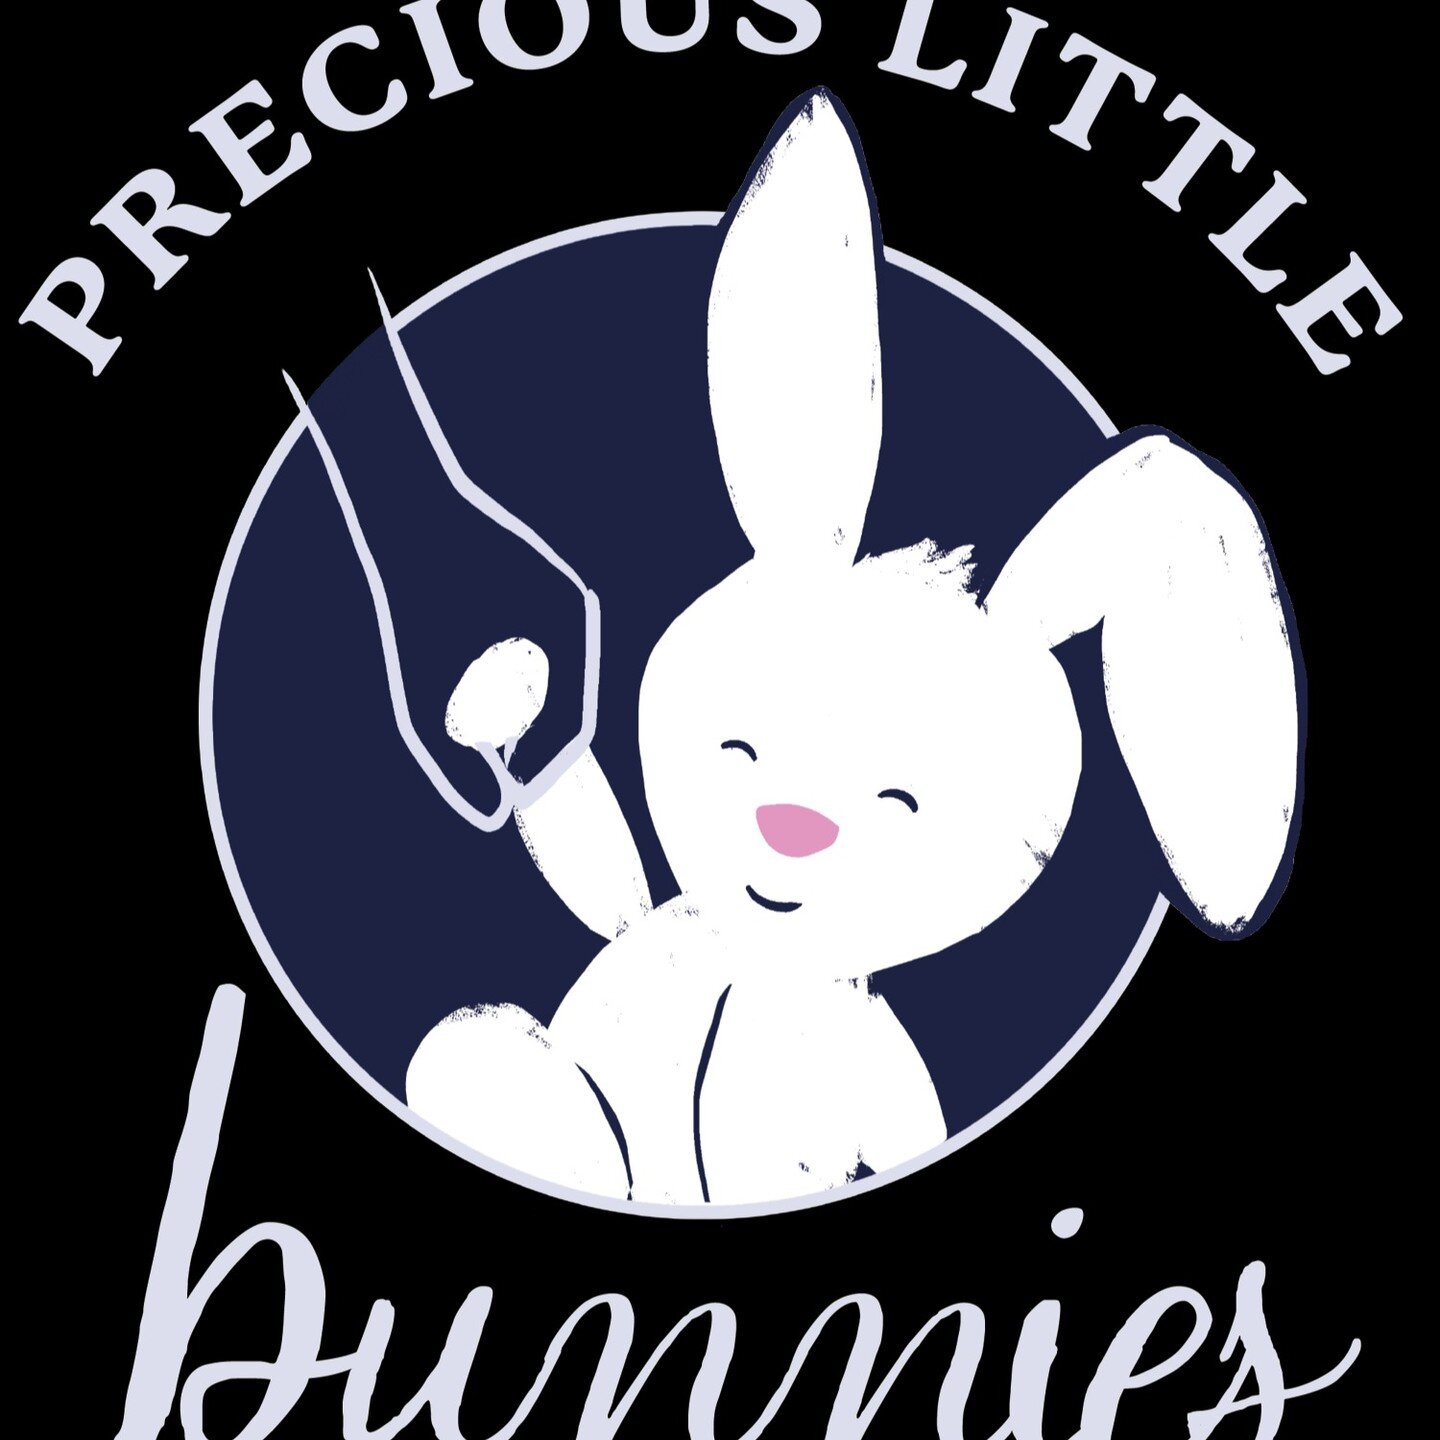 SLEEP - I worked with the lovely Kate @precious_little_bunnies a few months ago, helping her to navigate the journey into parenting three little ones. 

Kate runs Precious Little Bunnies, a Baby and Child Sleep Consultancy, so we had lots to chat abo